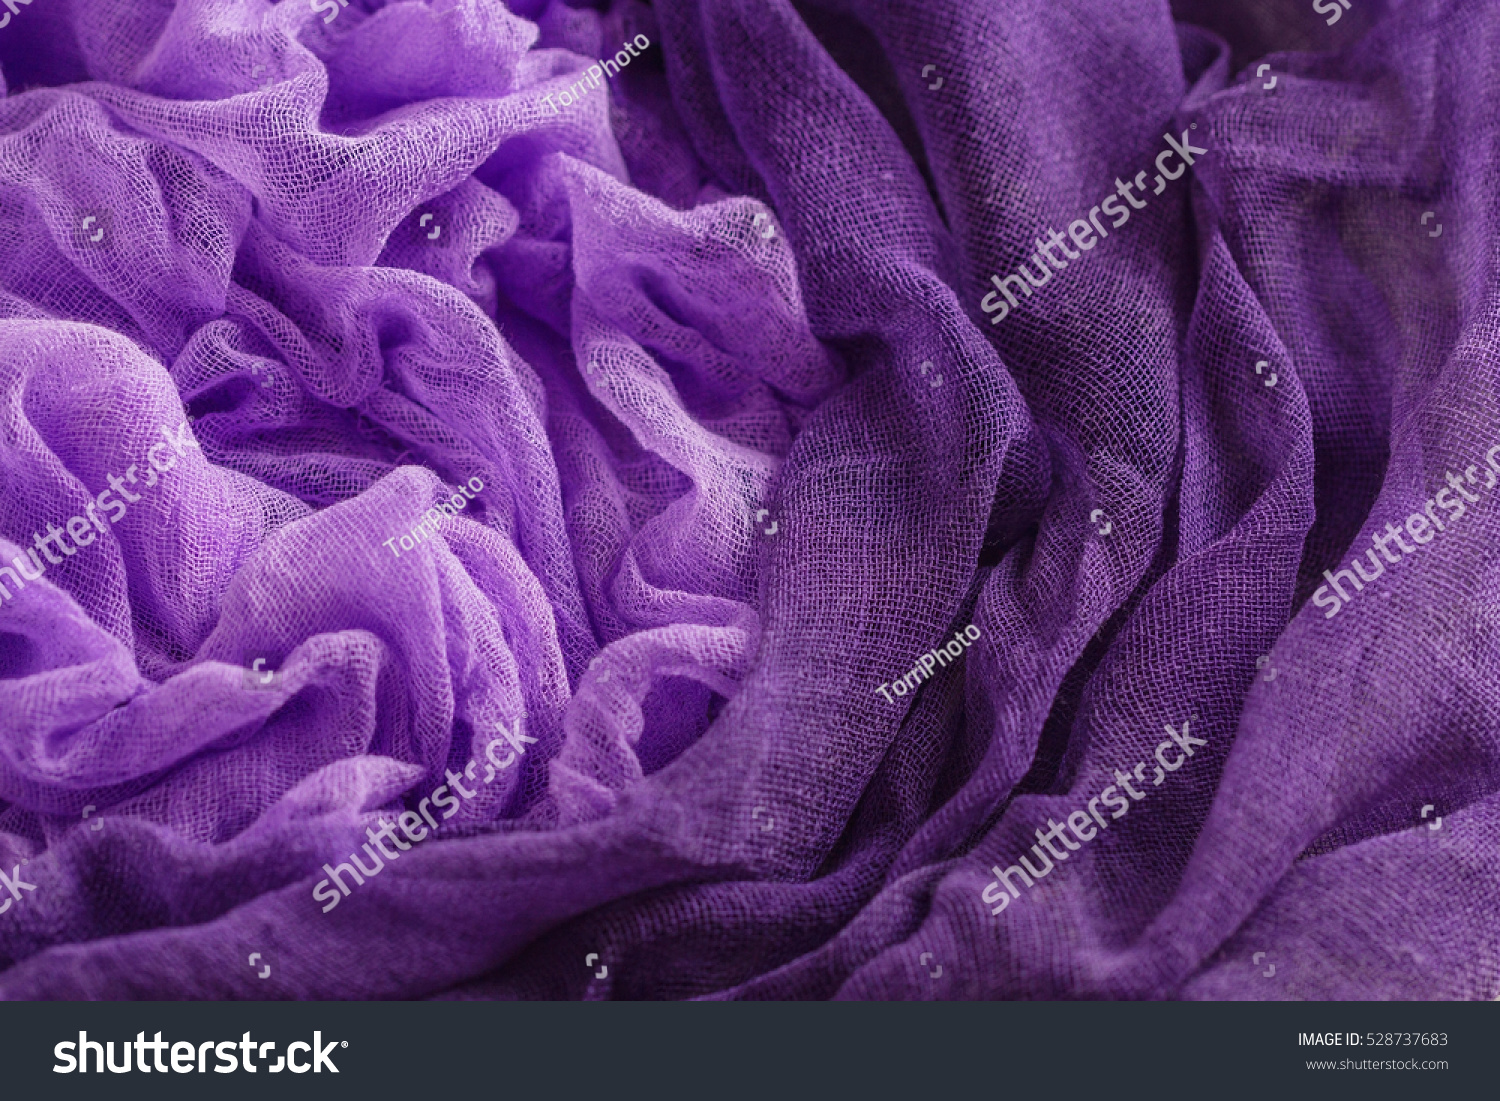 https://www.shutterstock.com/pic-528737683/stock-photo-hand-dyed-gauze-fabric-purple-color-colorful-cloth-texture-background.html